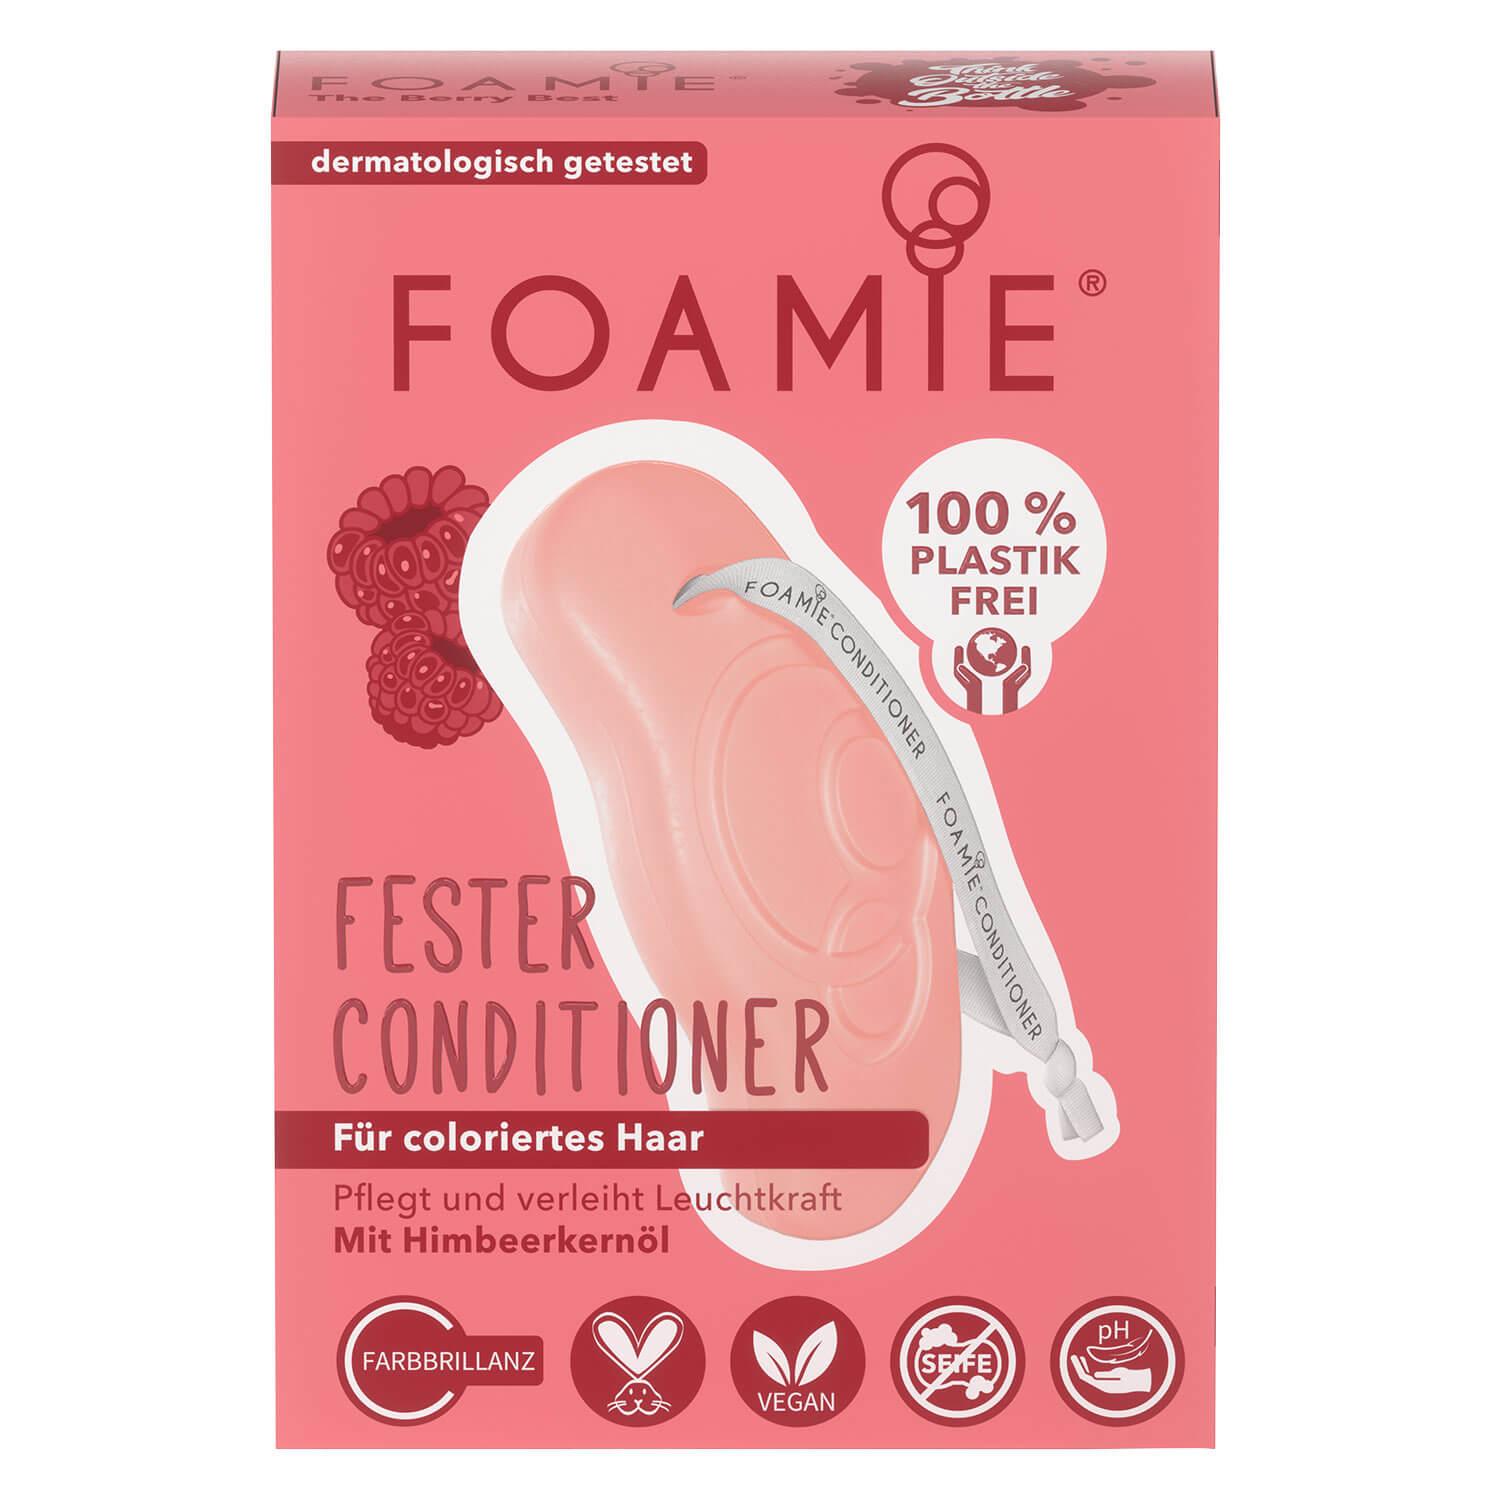 Foamie - Fester Conditioner The Berry Best